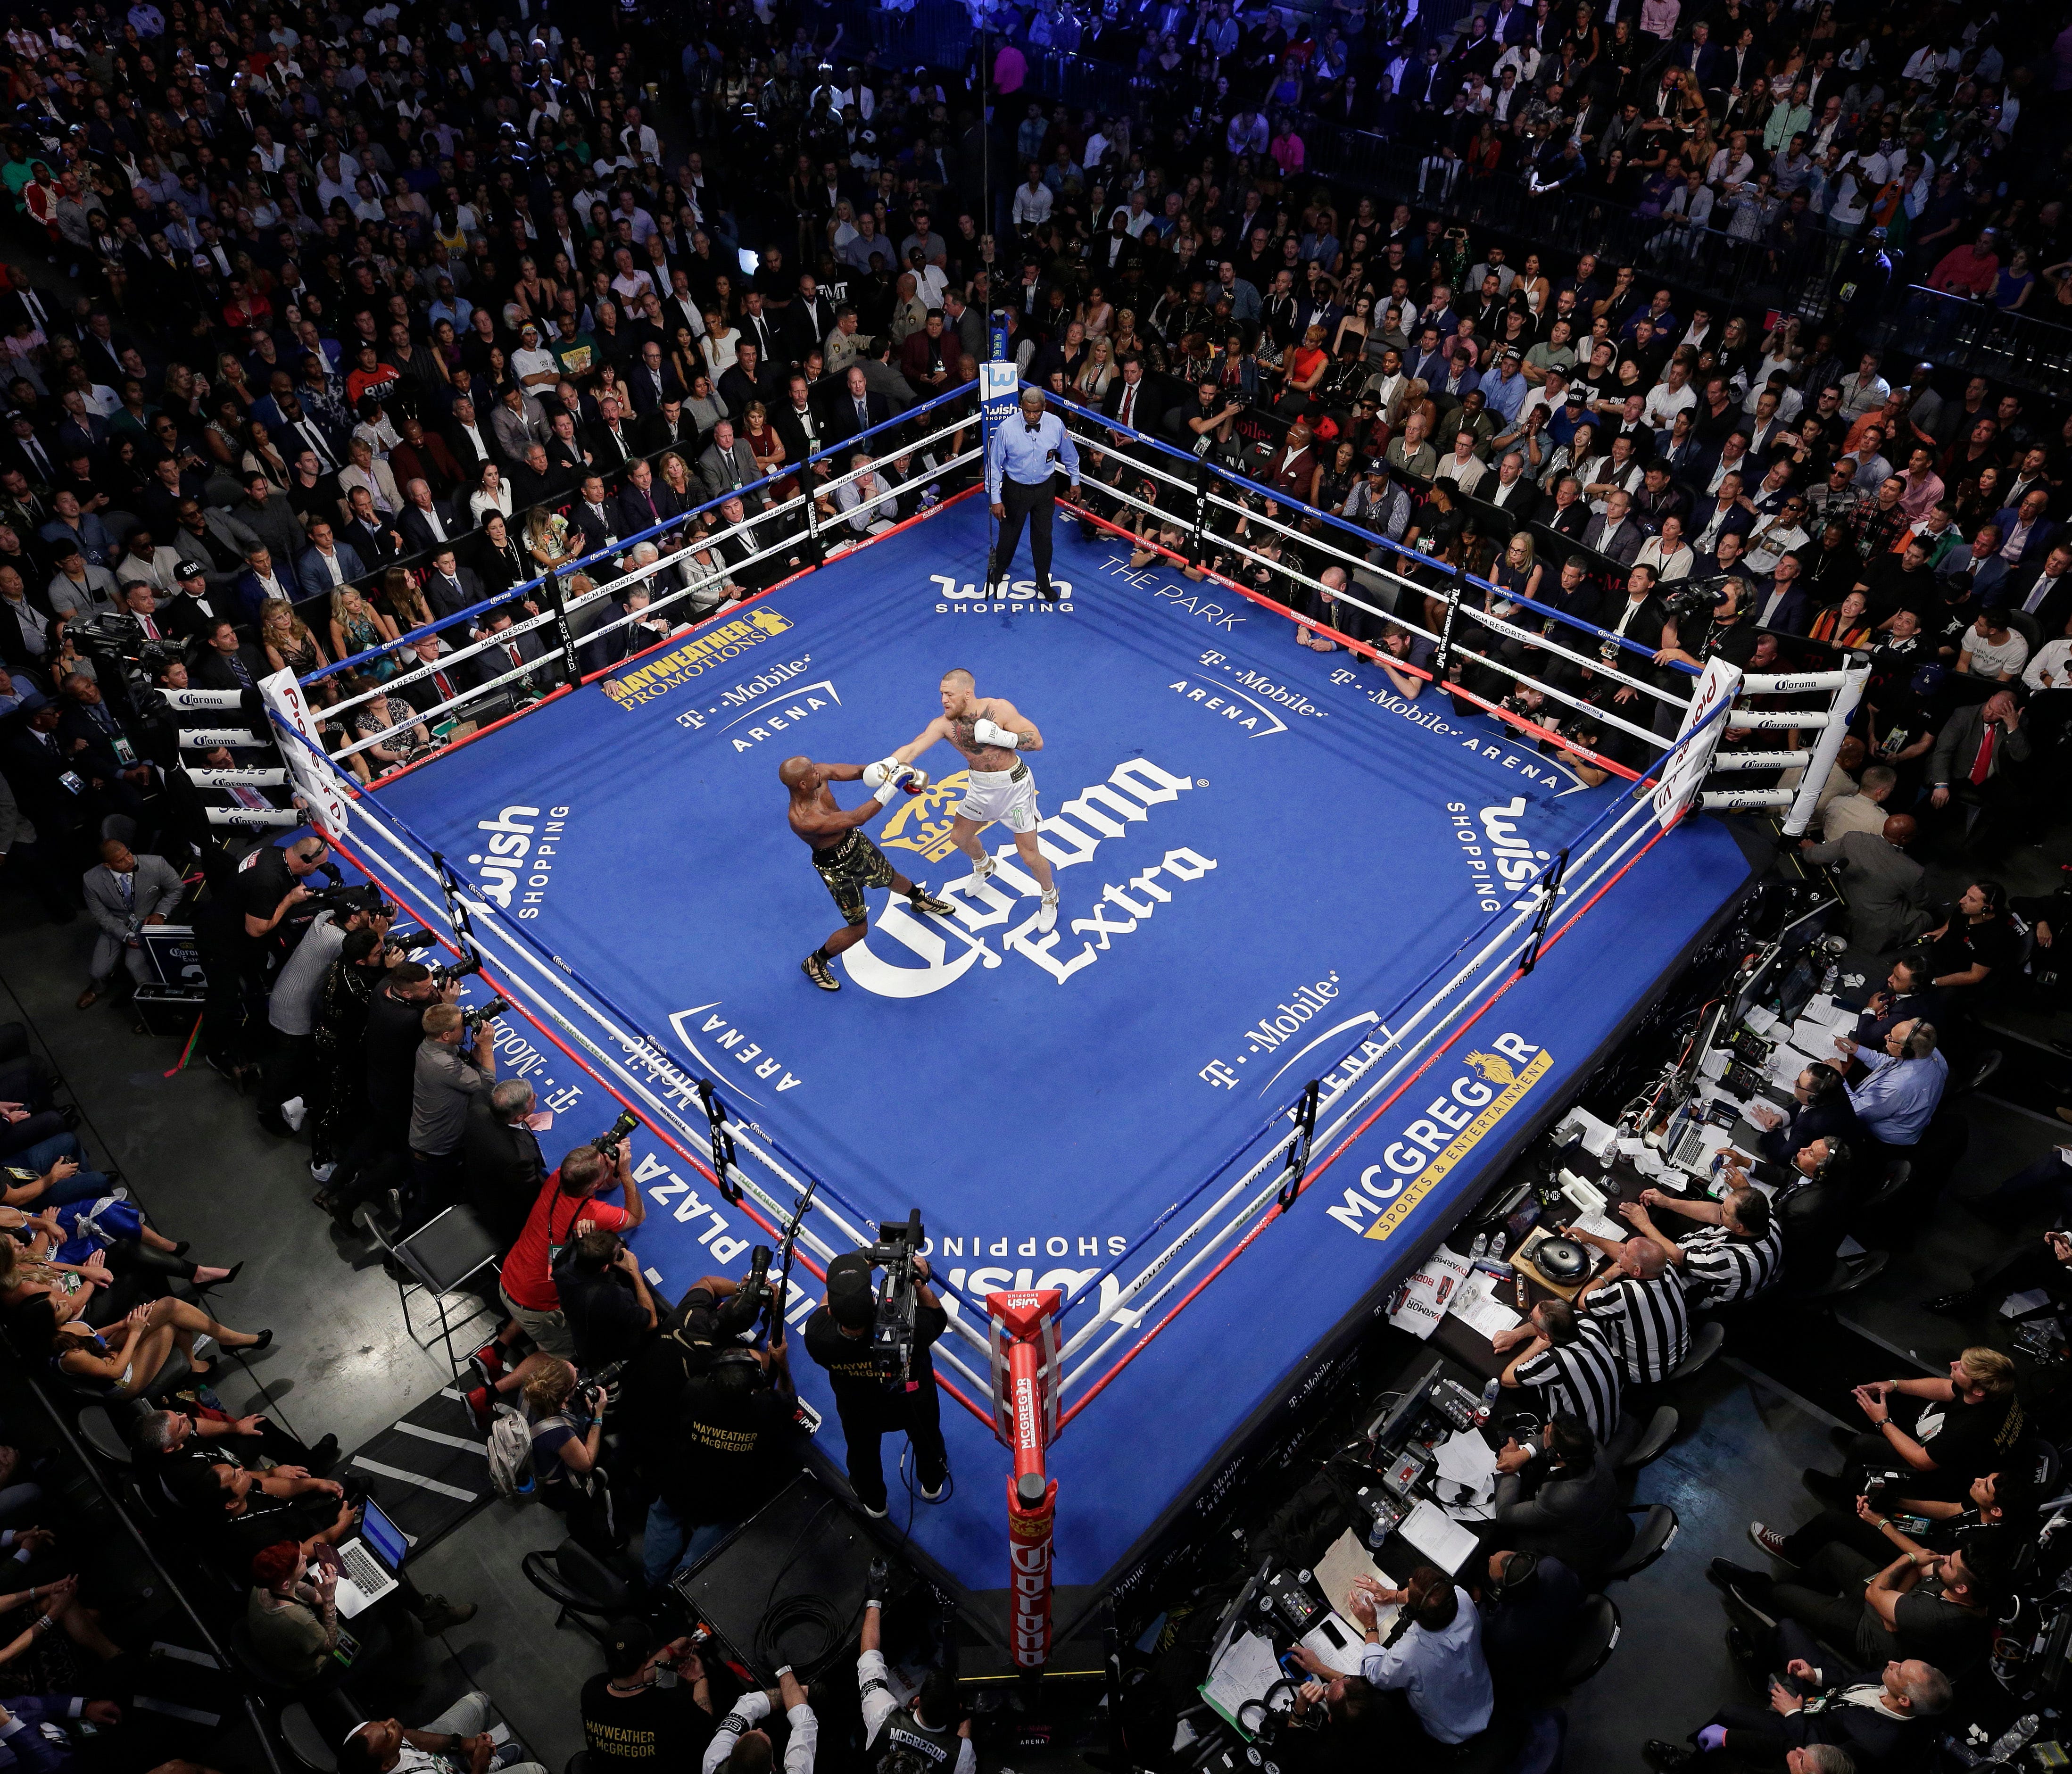 Floyd Mayweather Jr., left, fights Conor McGregor in a super welterweight boxing match Saturday, Aug. 26, 2017, in Las Vegas. (AP Photo/Eric Jamison) ORG XMIT: NVJL217